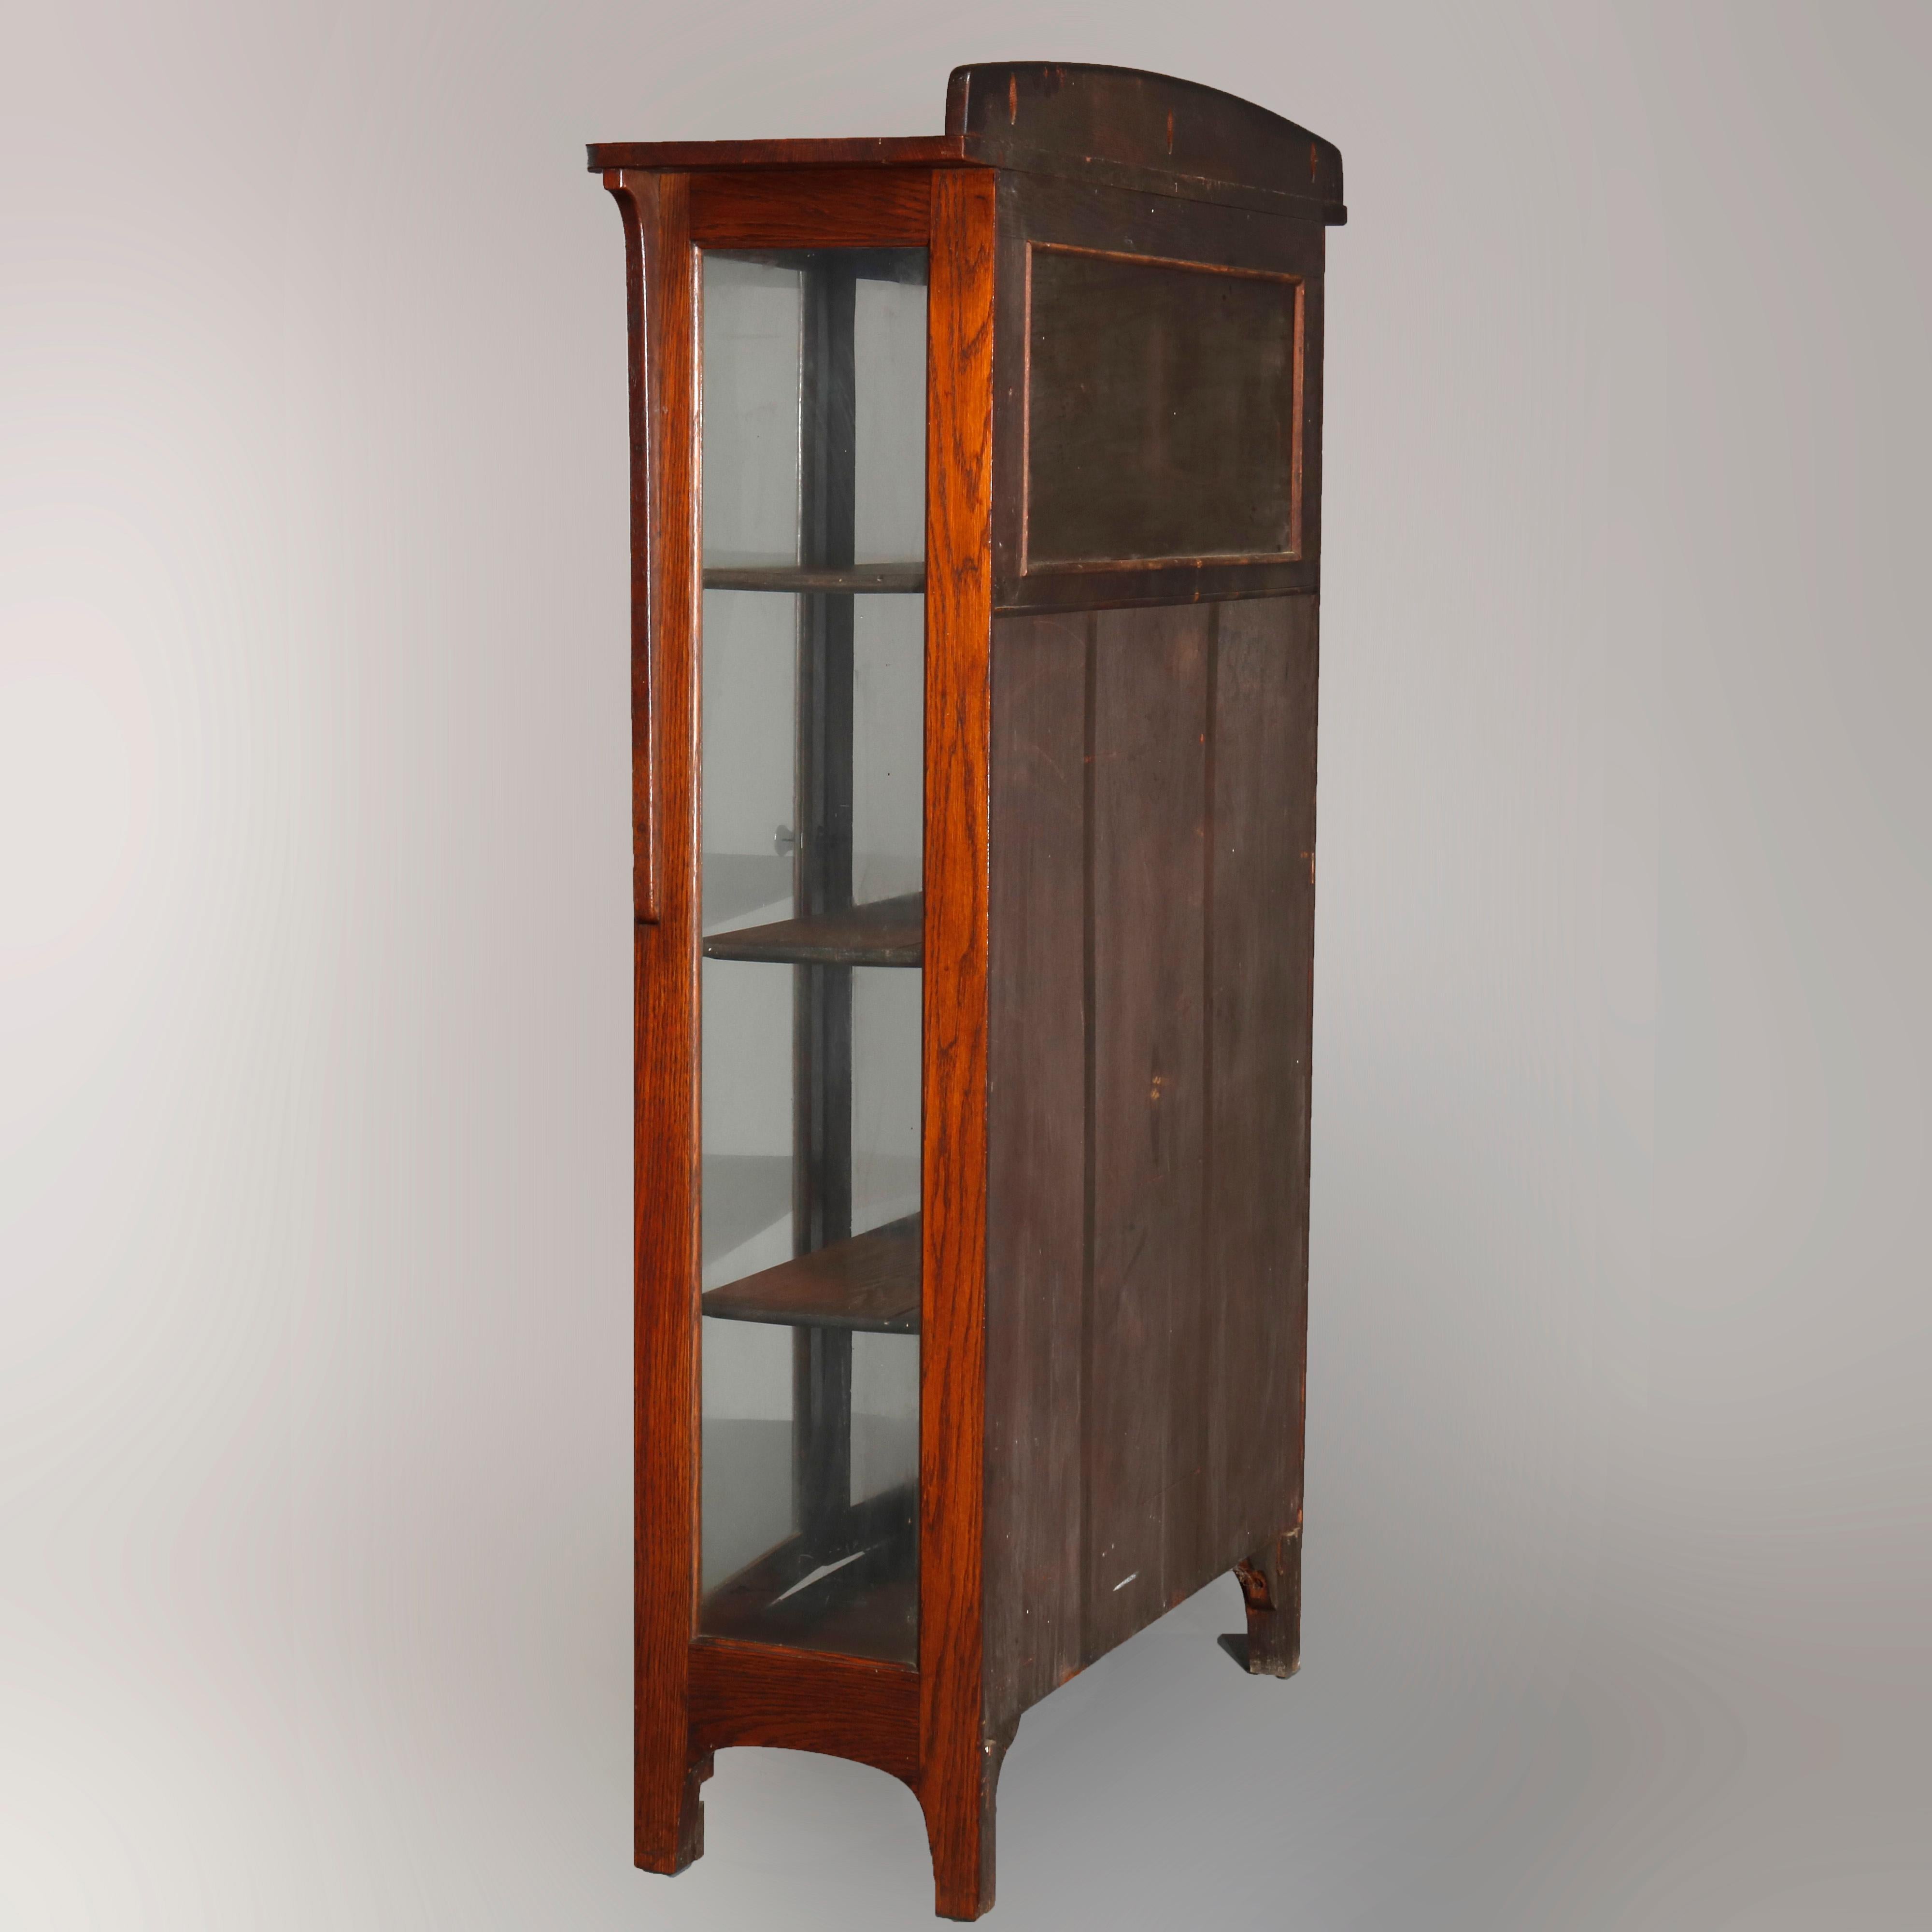 An antique Arts & Crafts mission oak china cabinet attributed to Limbert offers oak construction with arched backsplash surmounting case with double glass doors opening to shelved interior, raised on straight legs with arched corbels, circa